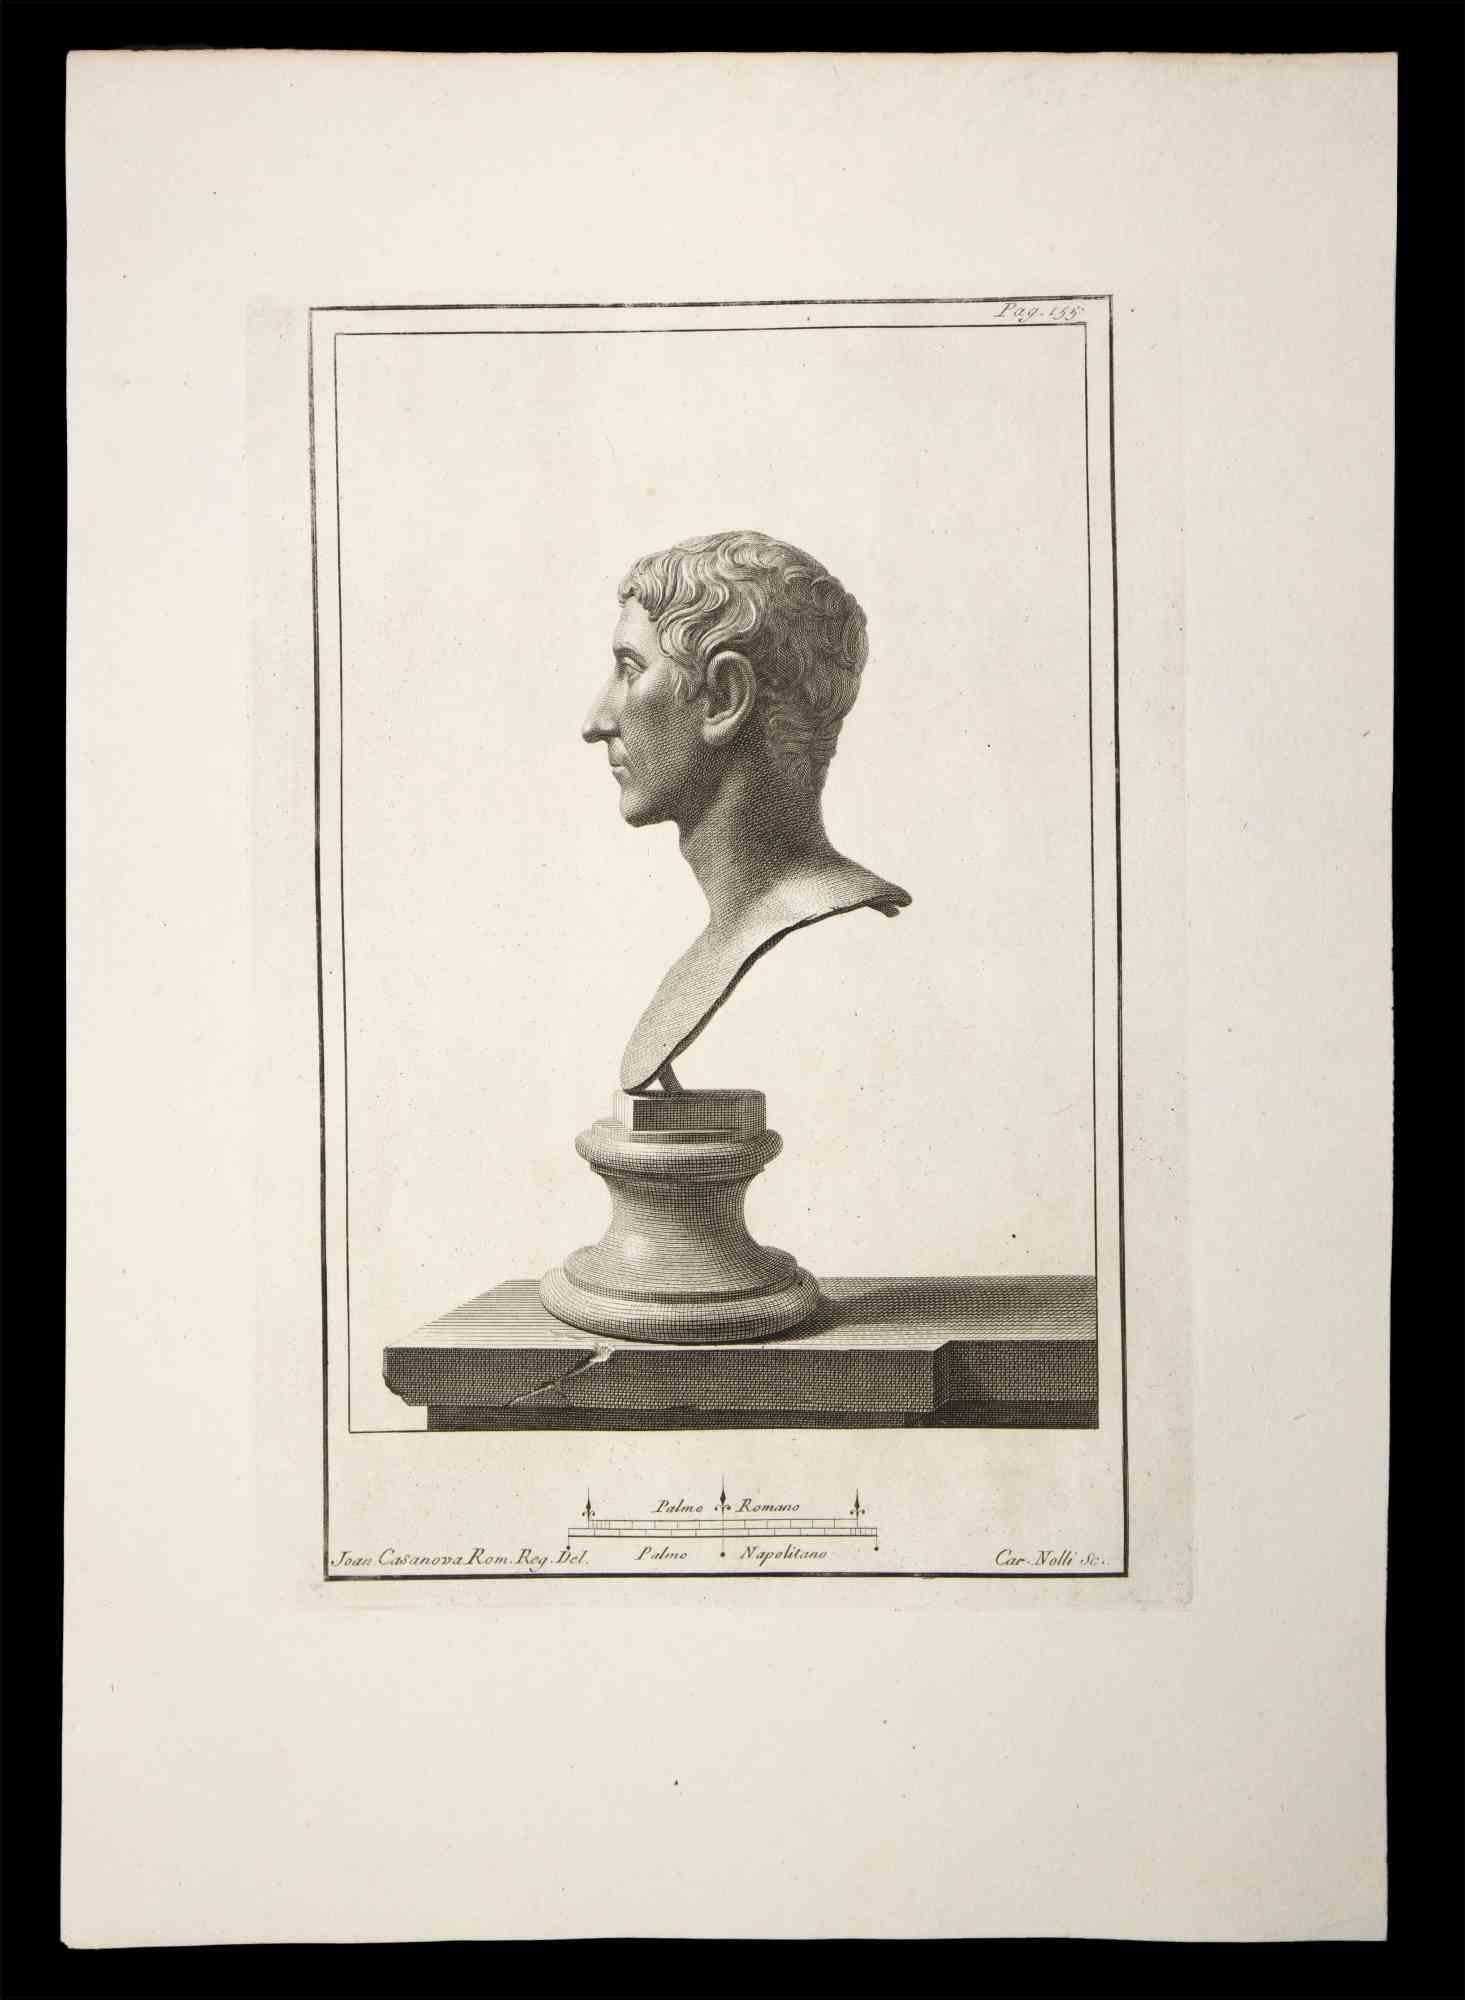 Ancient Roman Bust, from the series "Antiquities of Herculaneum", is an original etching on paper realized by Carlo Nolli in the 18th century.

Signed on the plate, on the lower right.

Good conditions.

The etching belongs to the print suite